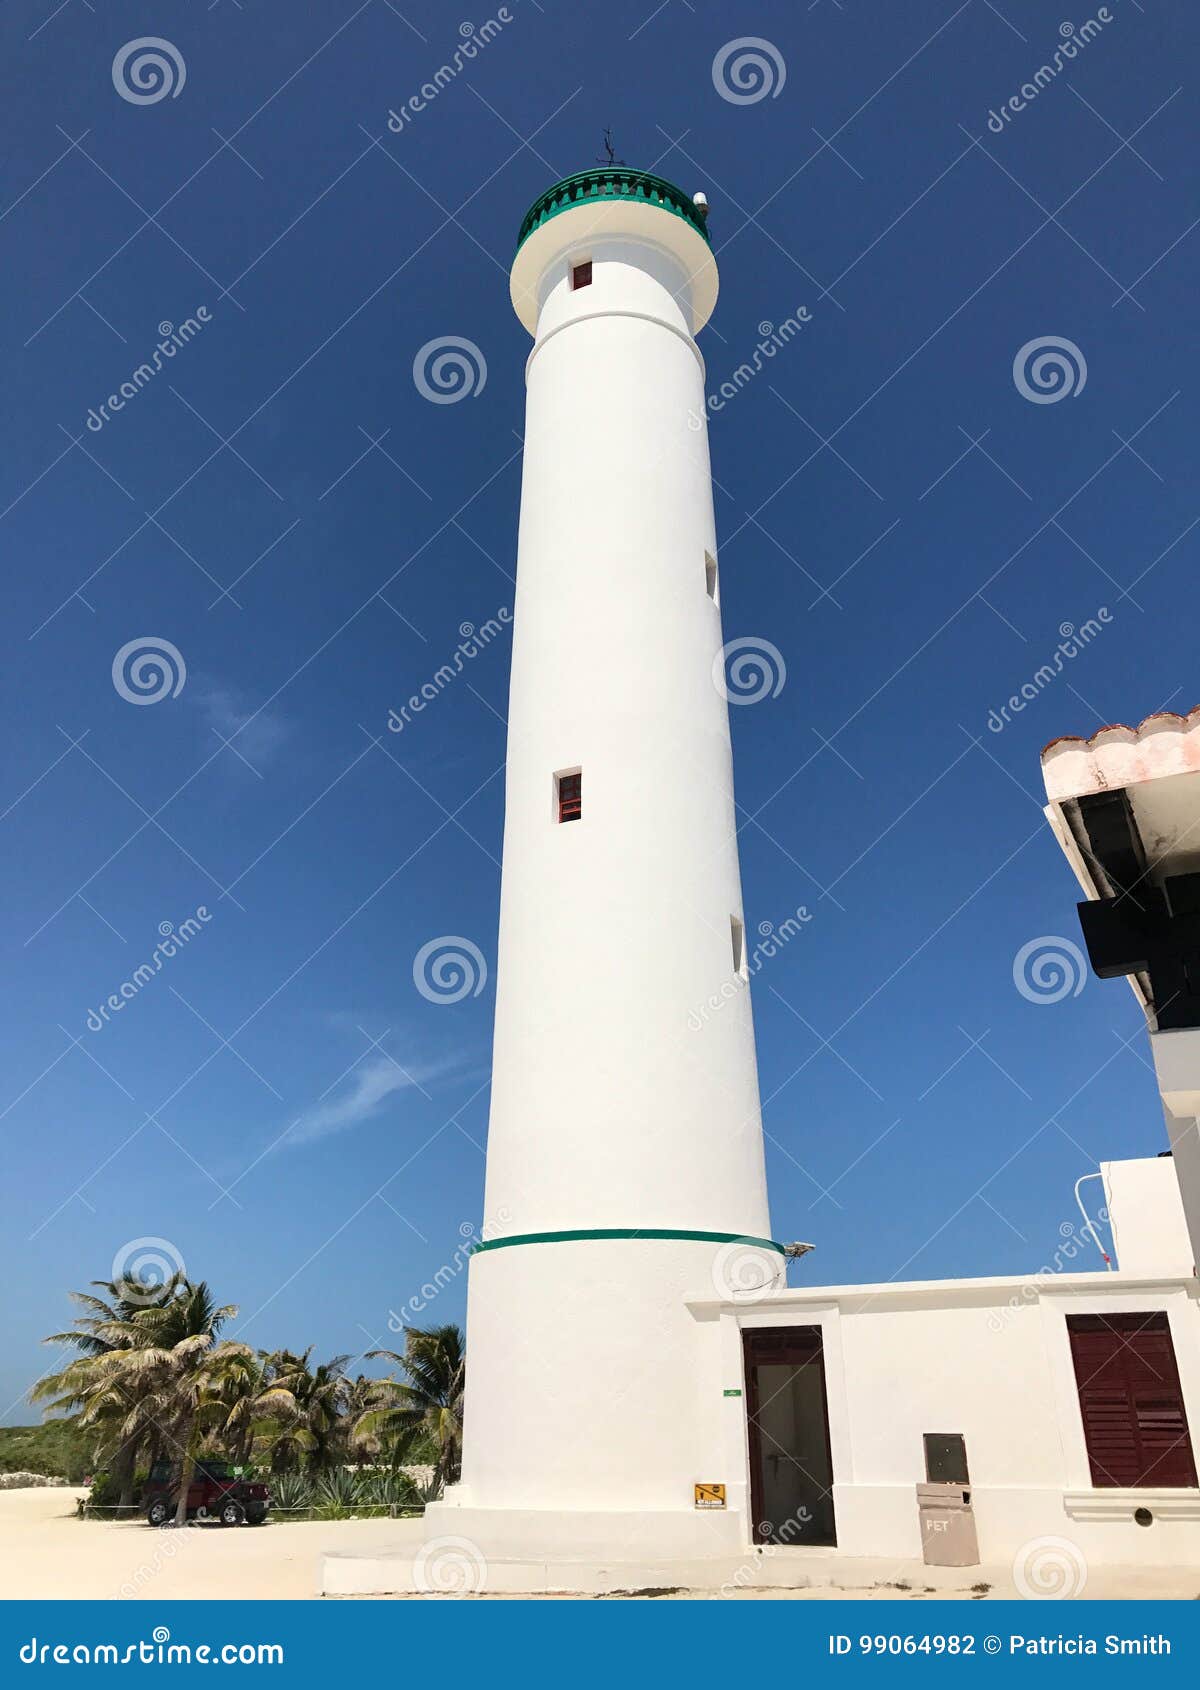 Celarain Lighthouse at Punta Sur Stock Photo - Image of vacation, temple:  99064982